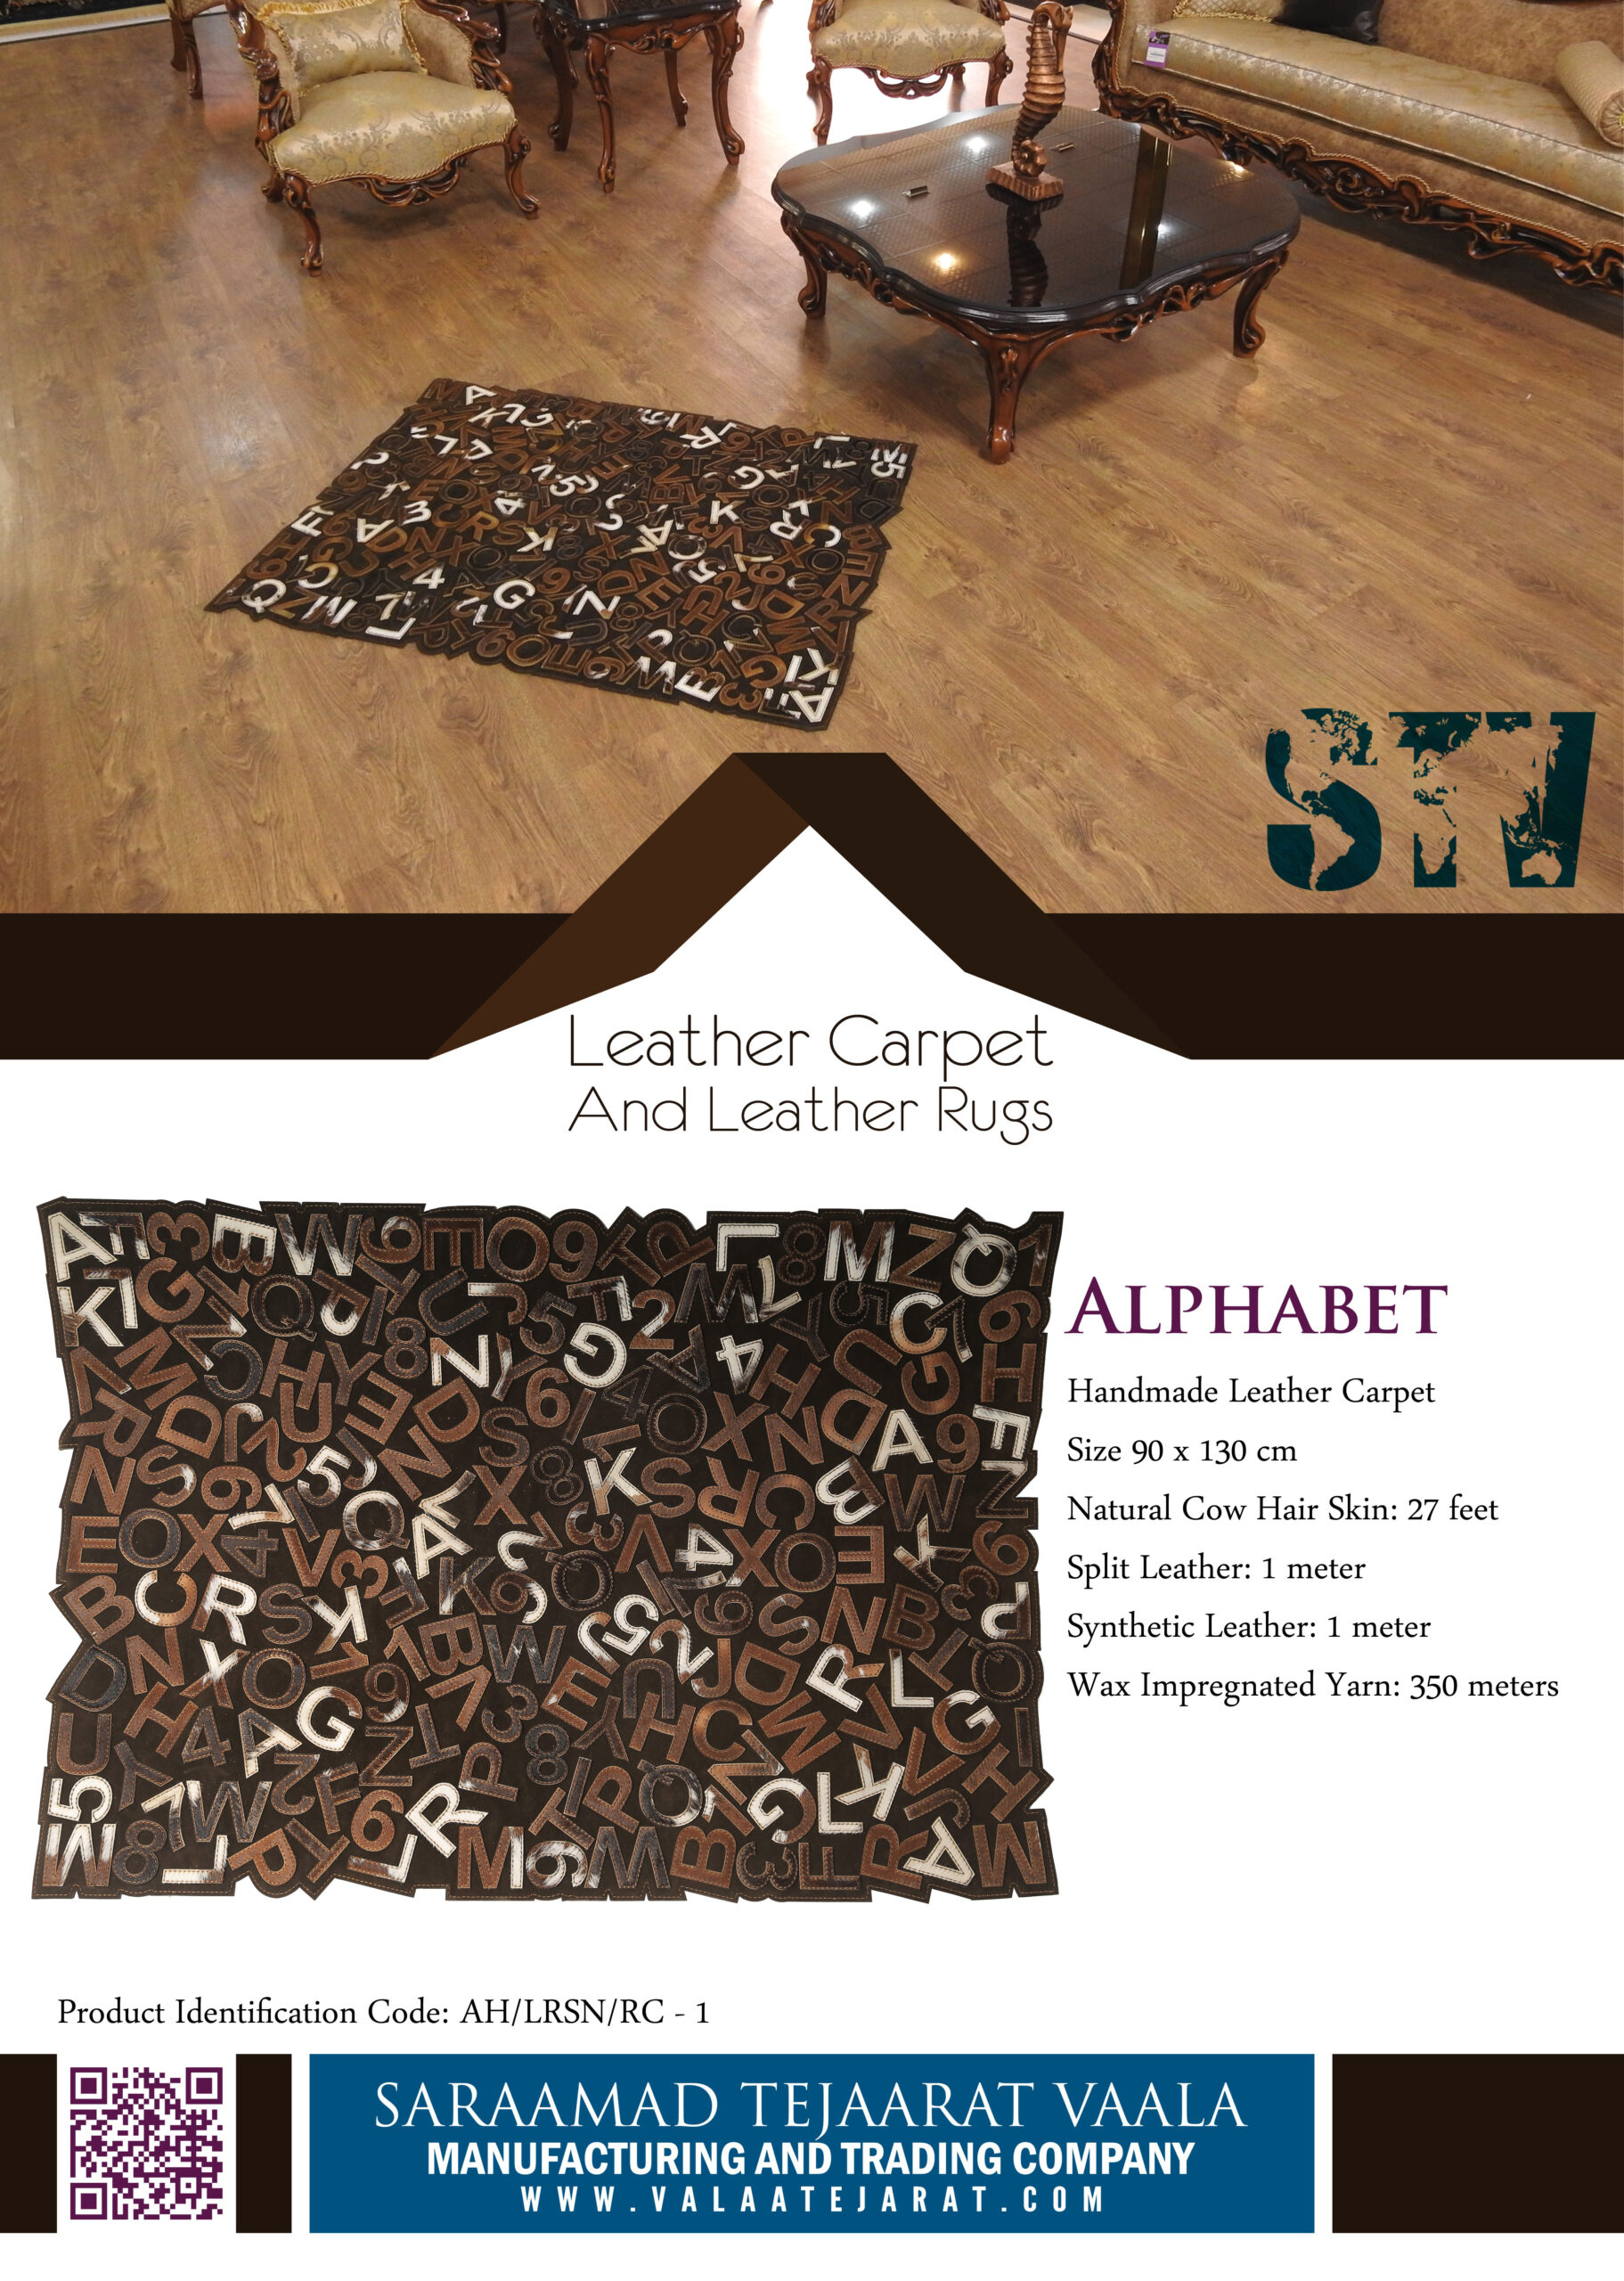 Leather Rugs and Leather Carpets